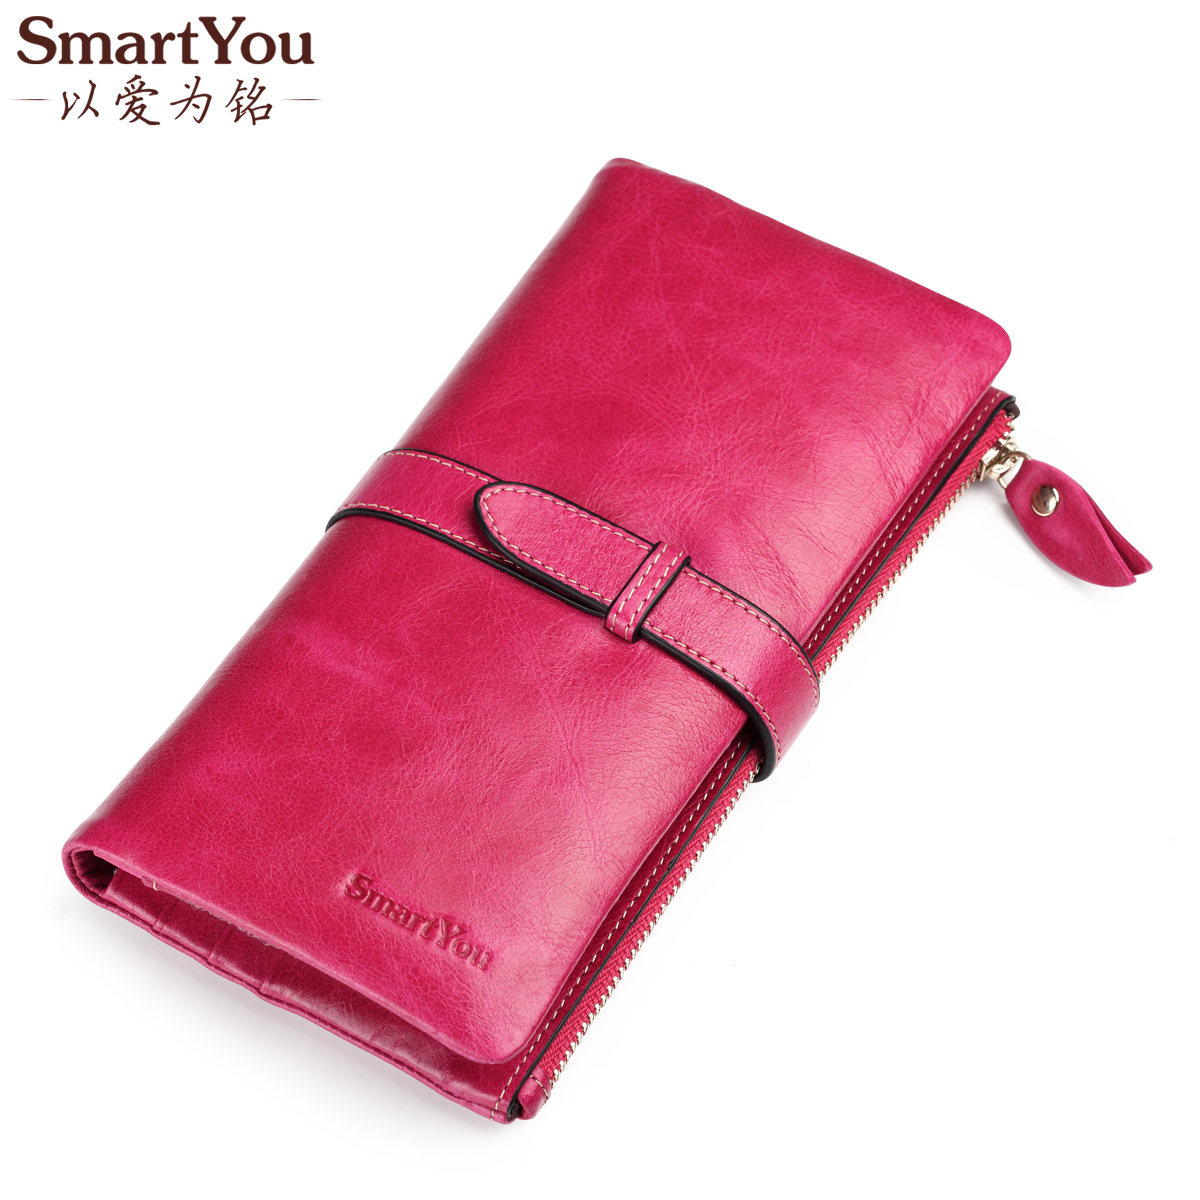 new fashion 2014  smartyou women's wallet female oil genuine leather design cowhide leather long wallet  personalized lettering